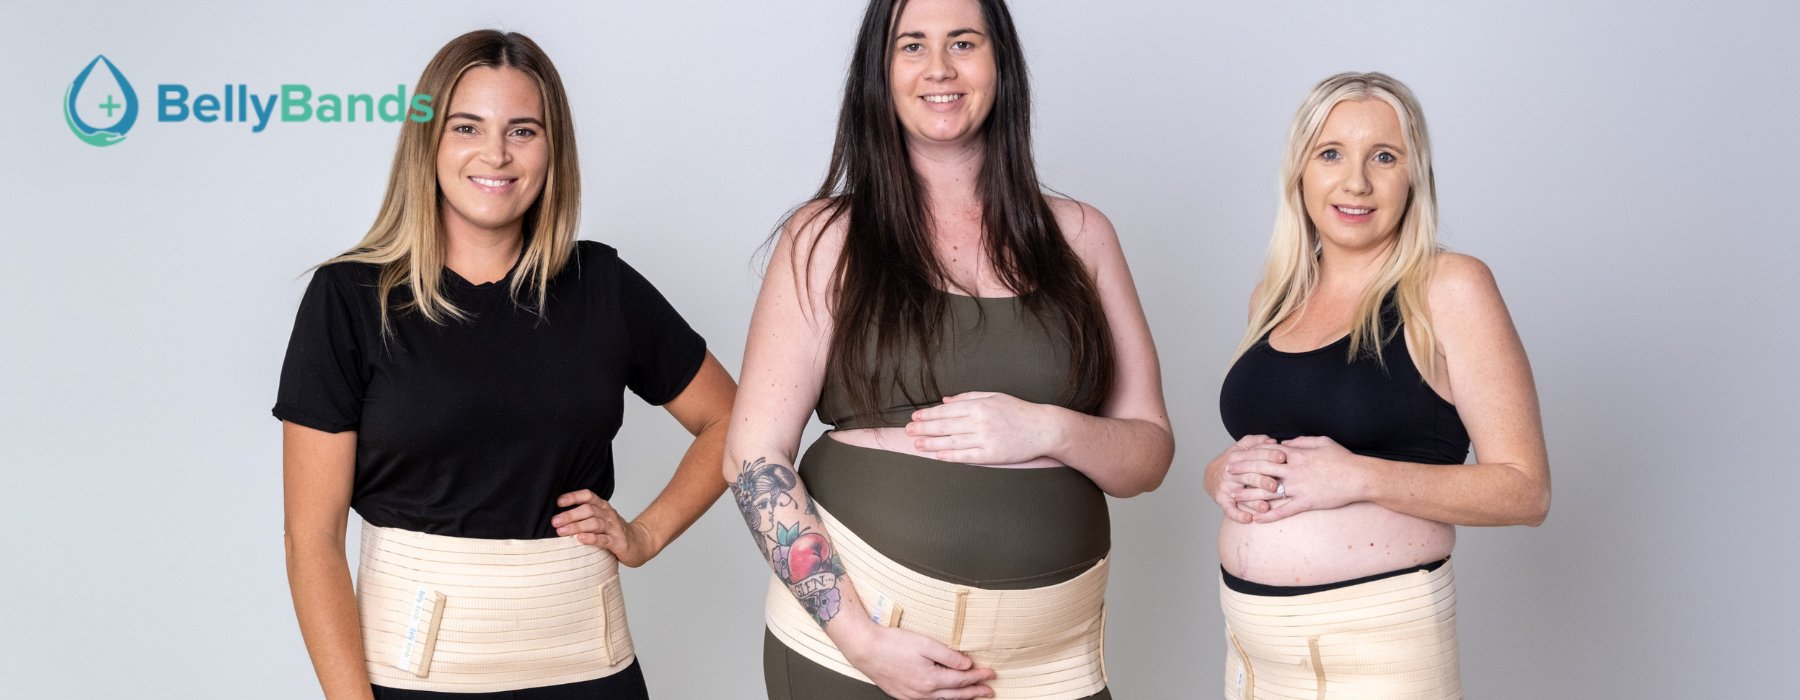 Everything you need to know about Exercise and Pregnancy - Belly Bands